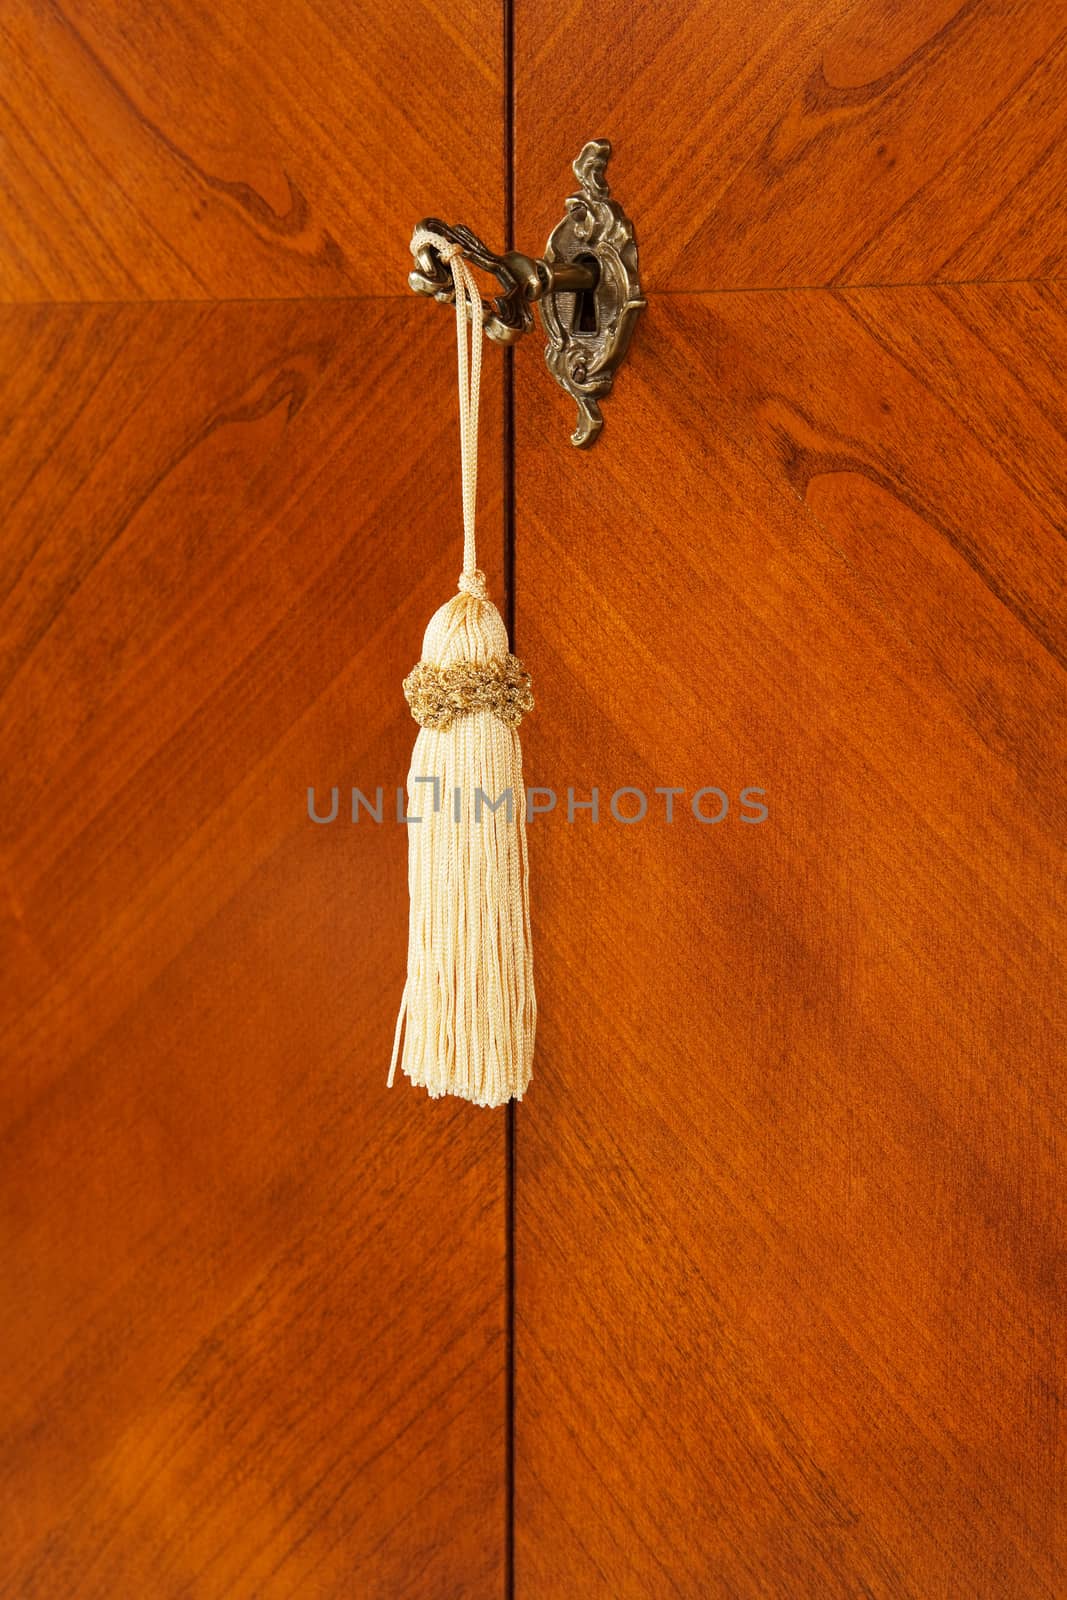 Bronze key with a tassel in a keyhole